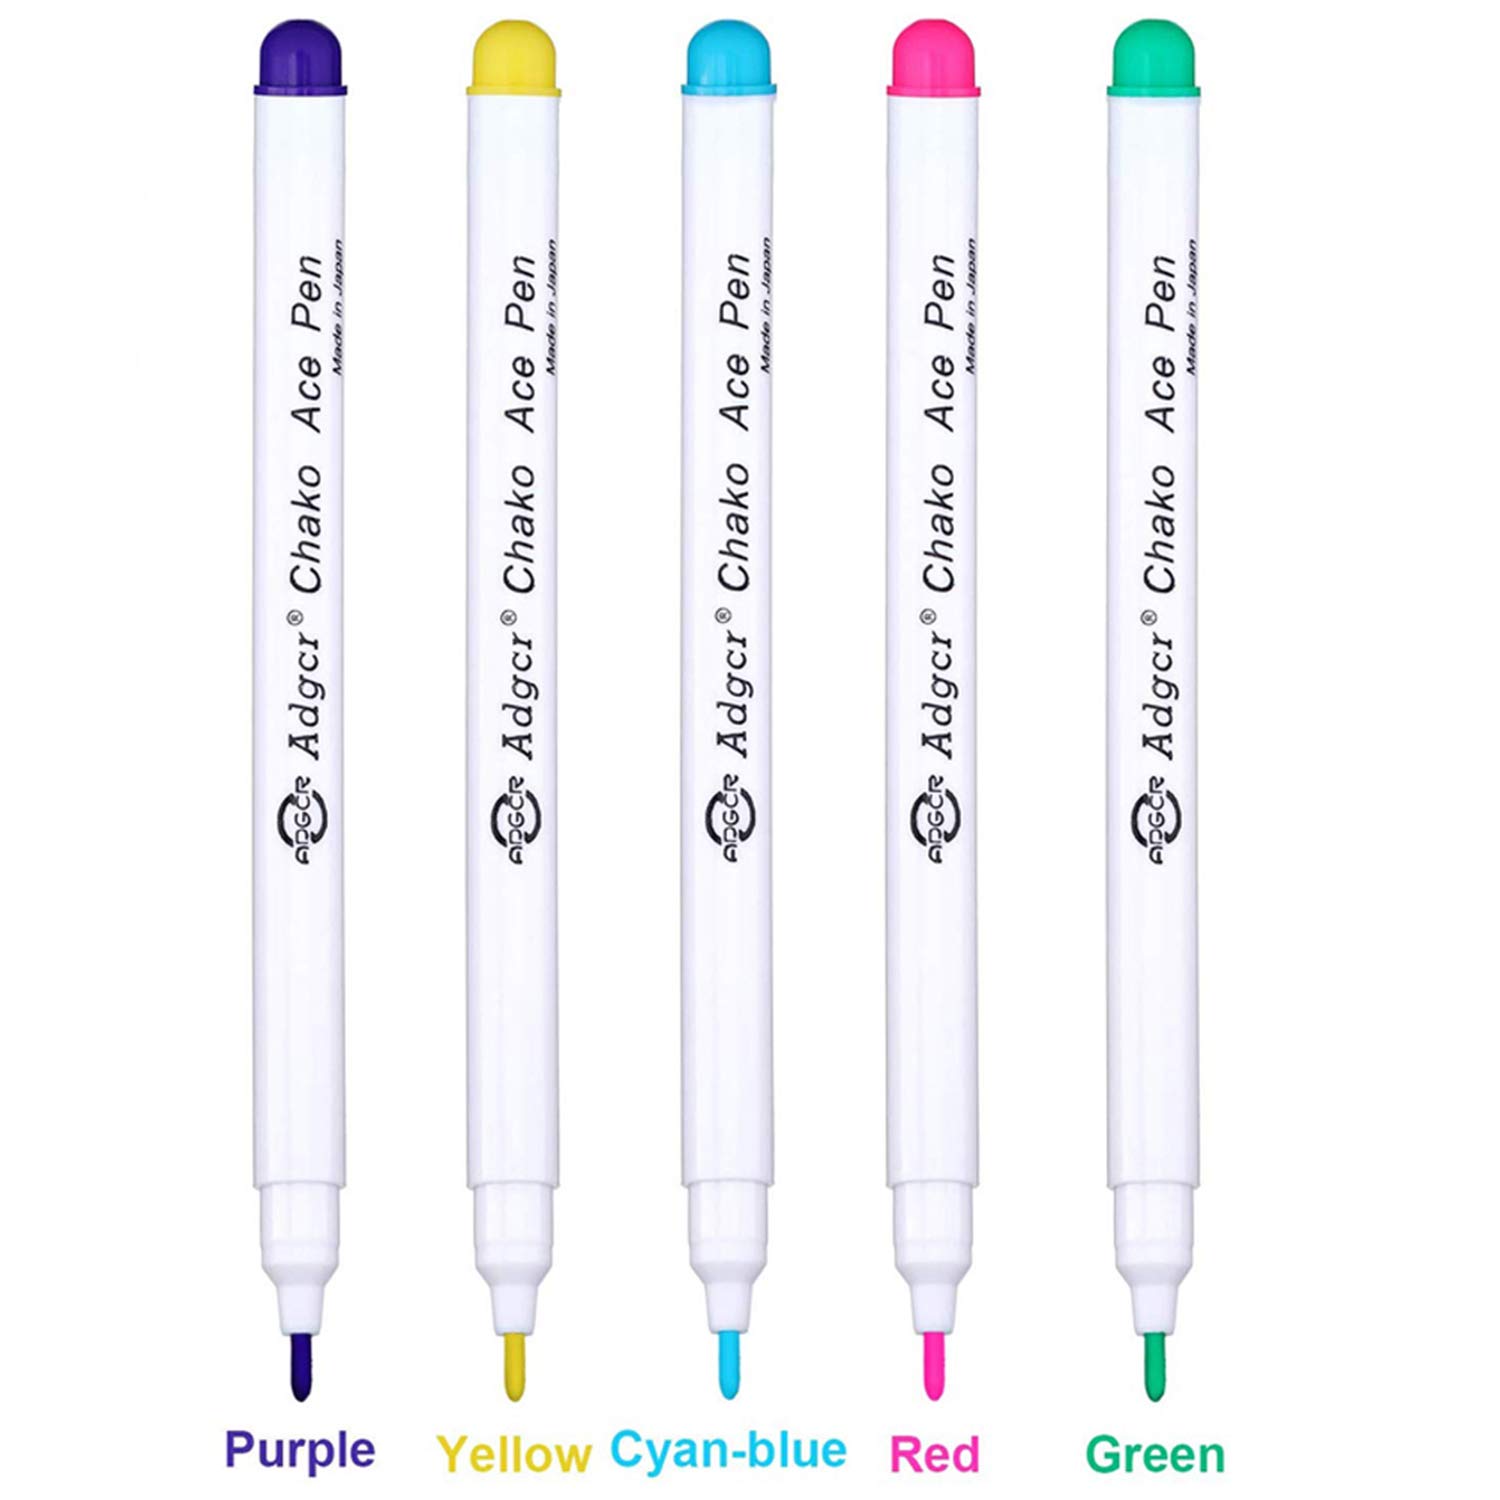 Sew Easy Water Erasable Fabric Marker - Blue